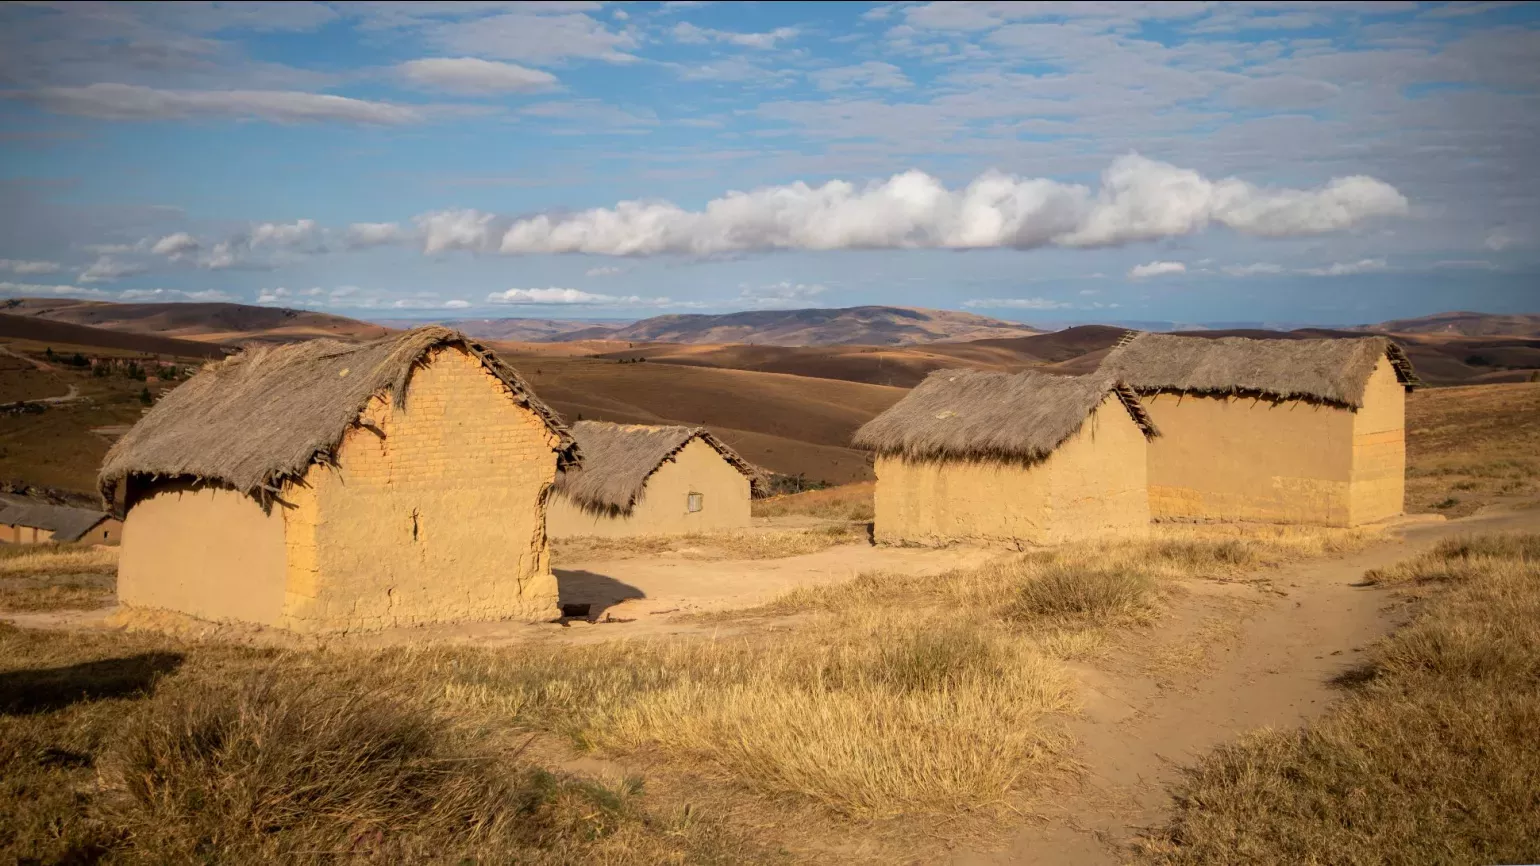 Small pale mud homes with thatched roofs.